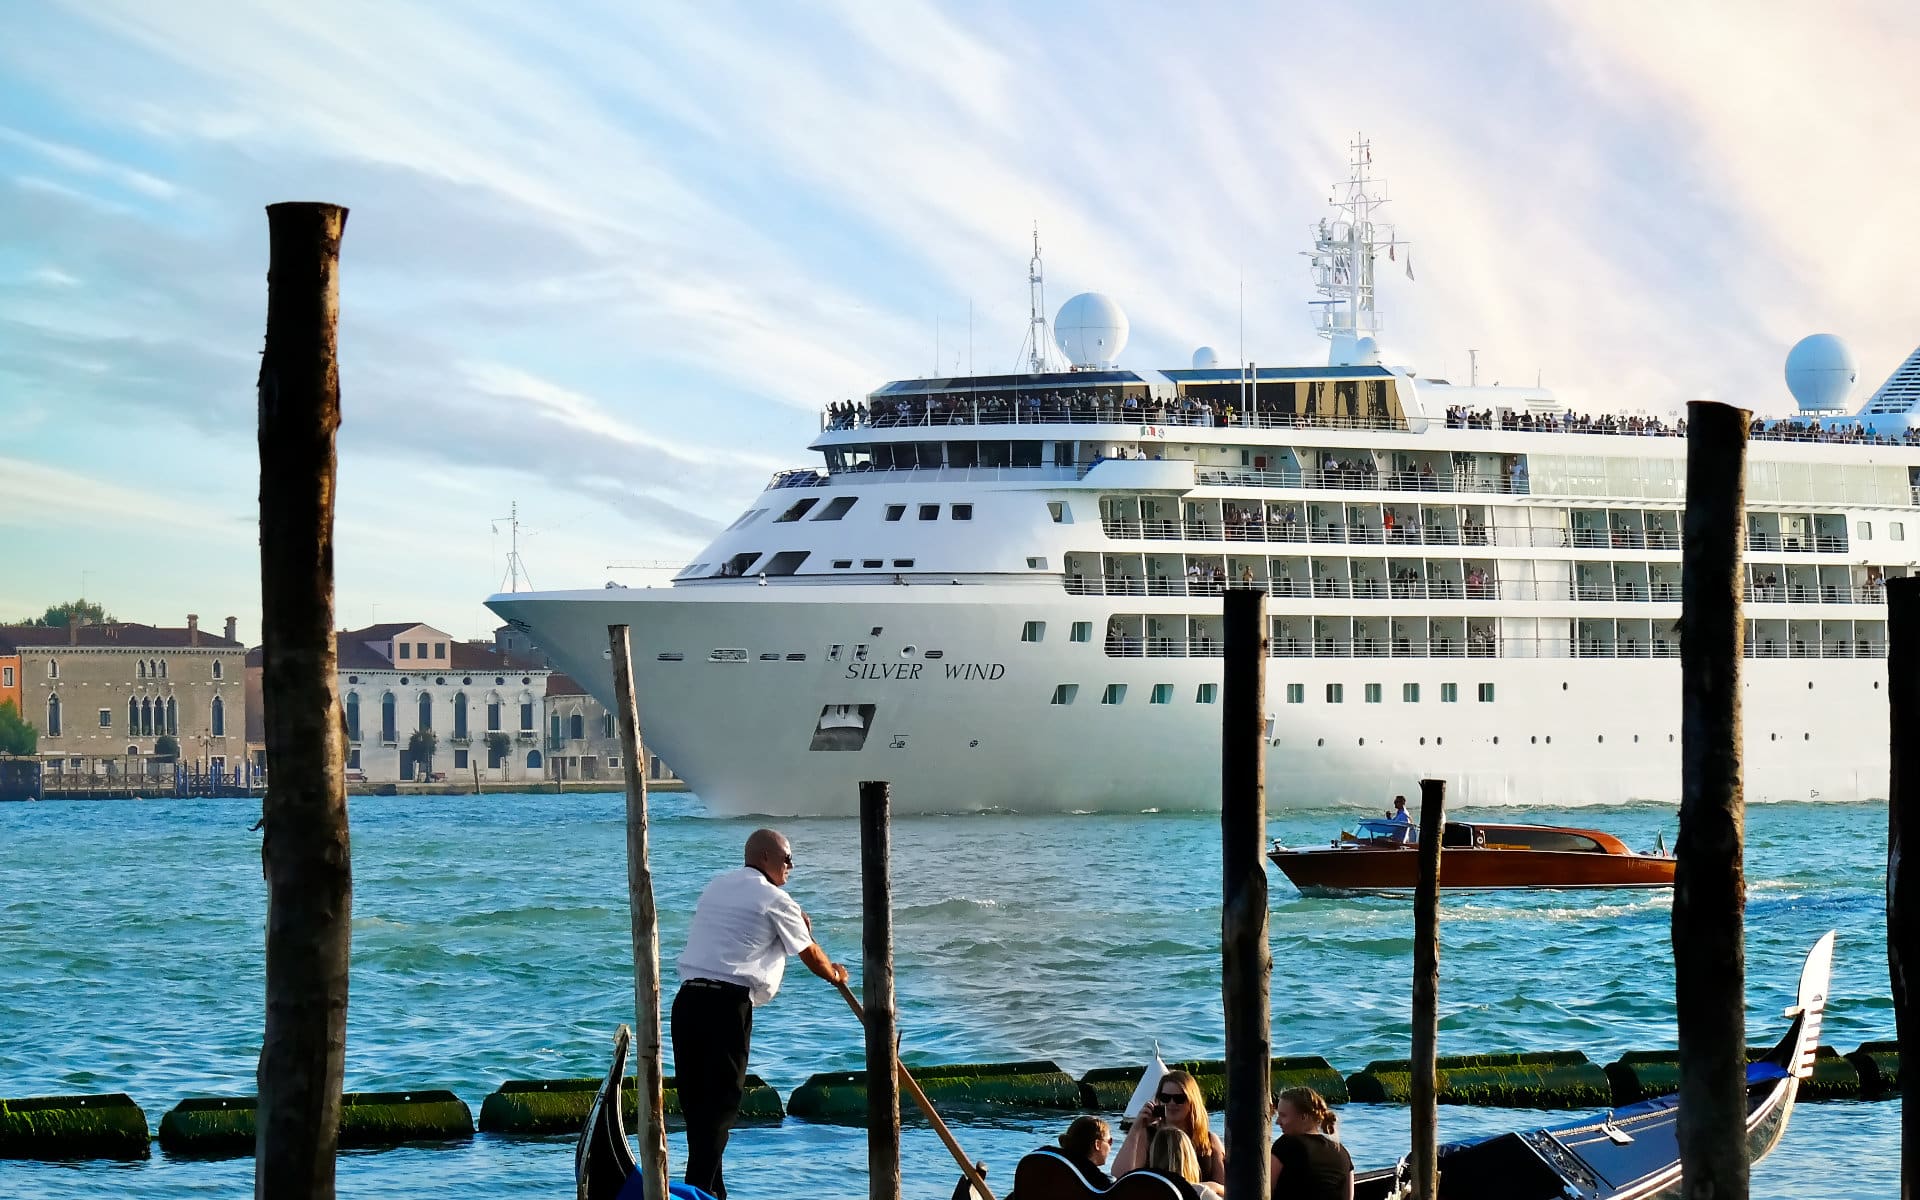 The Silver Wind cruise ship pictured here can board in Venice.